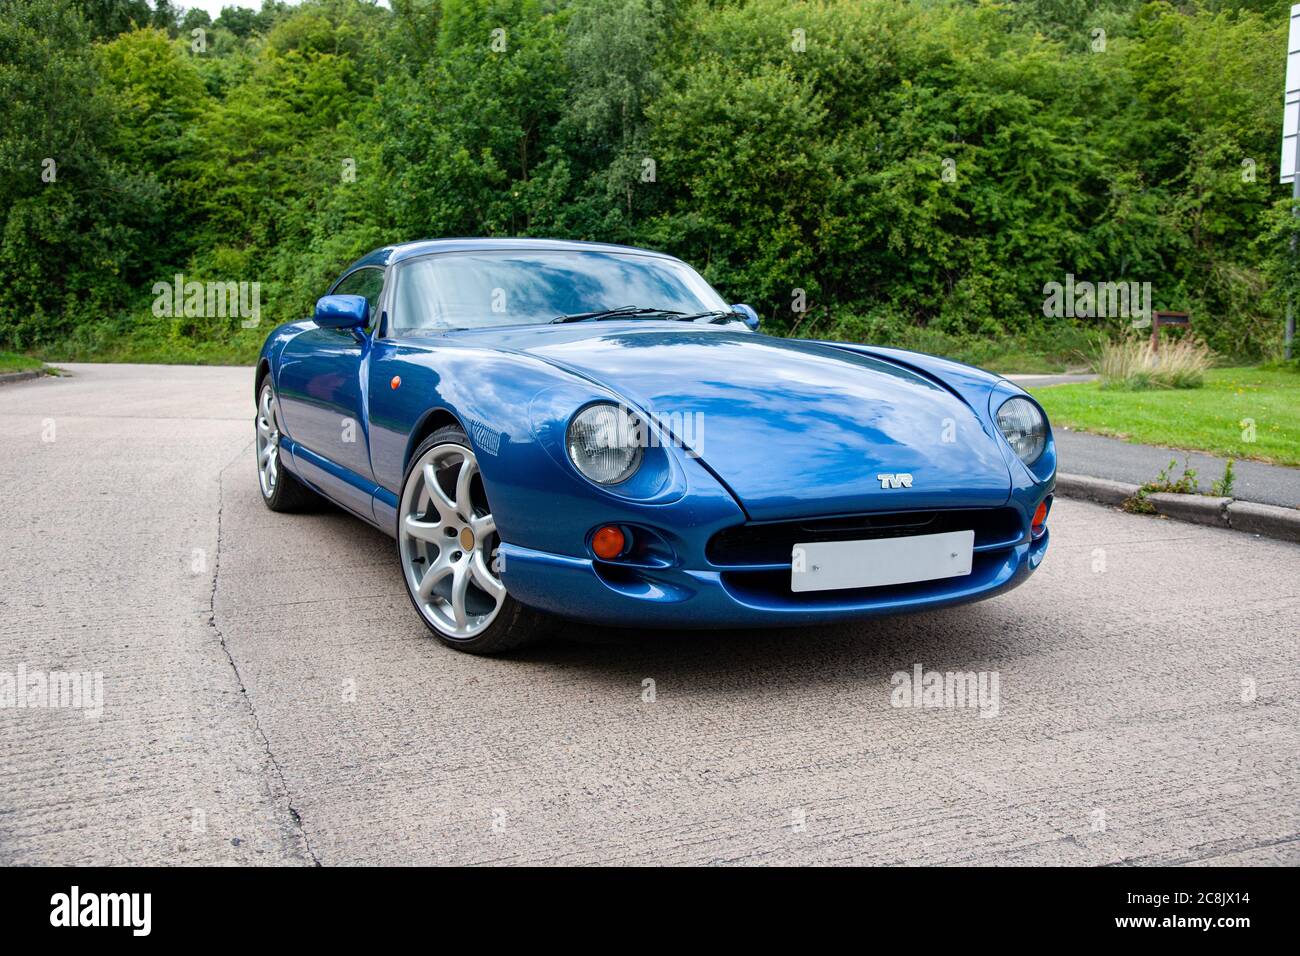 British TVR Cerbera muscle car parked on a country lane Stock Photo